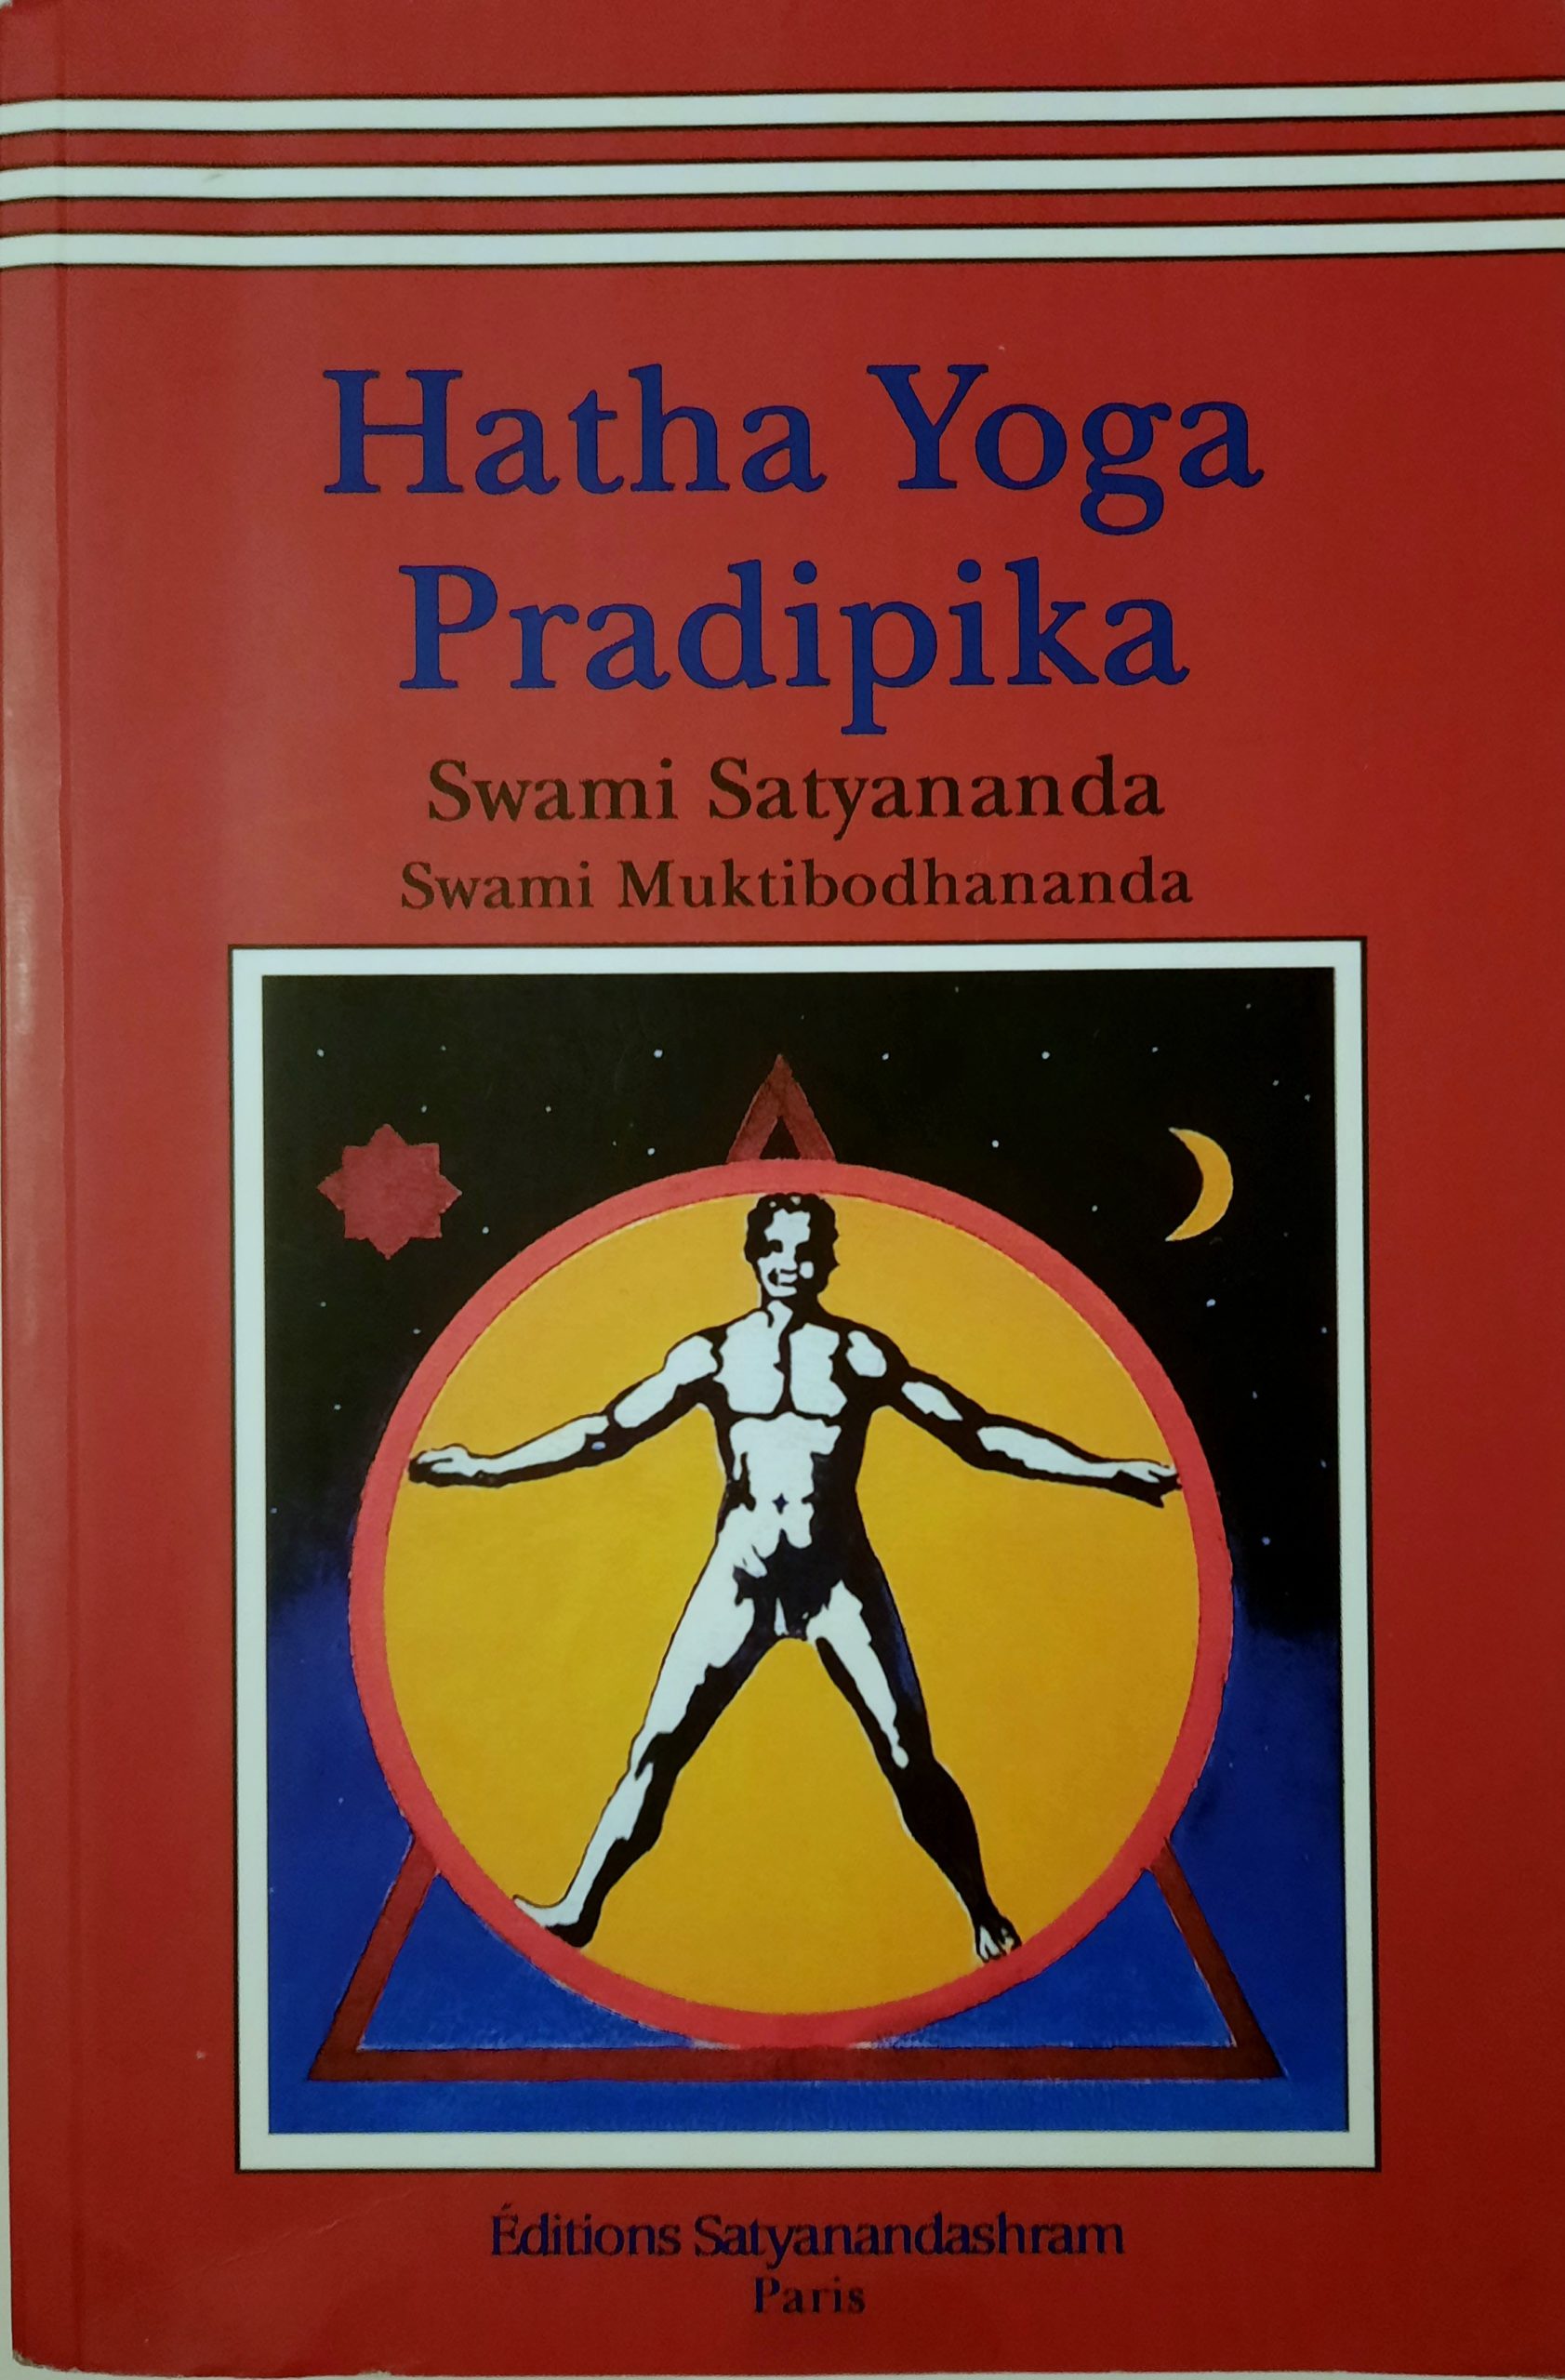 You are currently viewing Hatha Yoga Pradipika